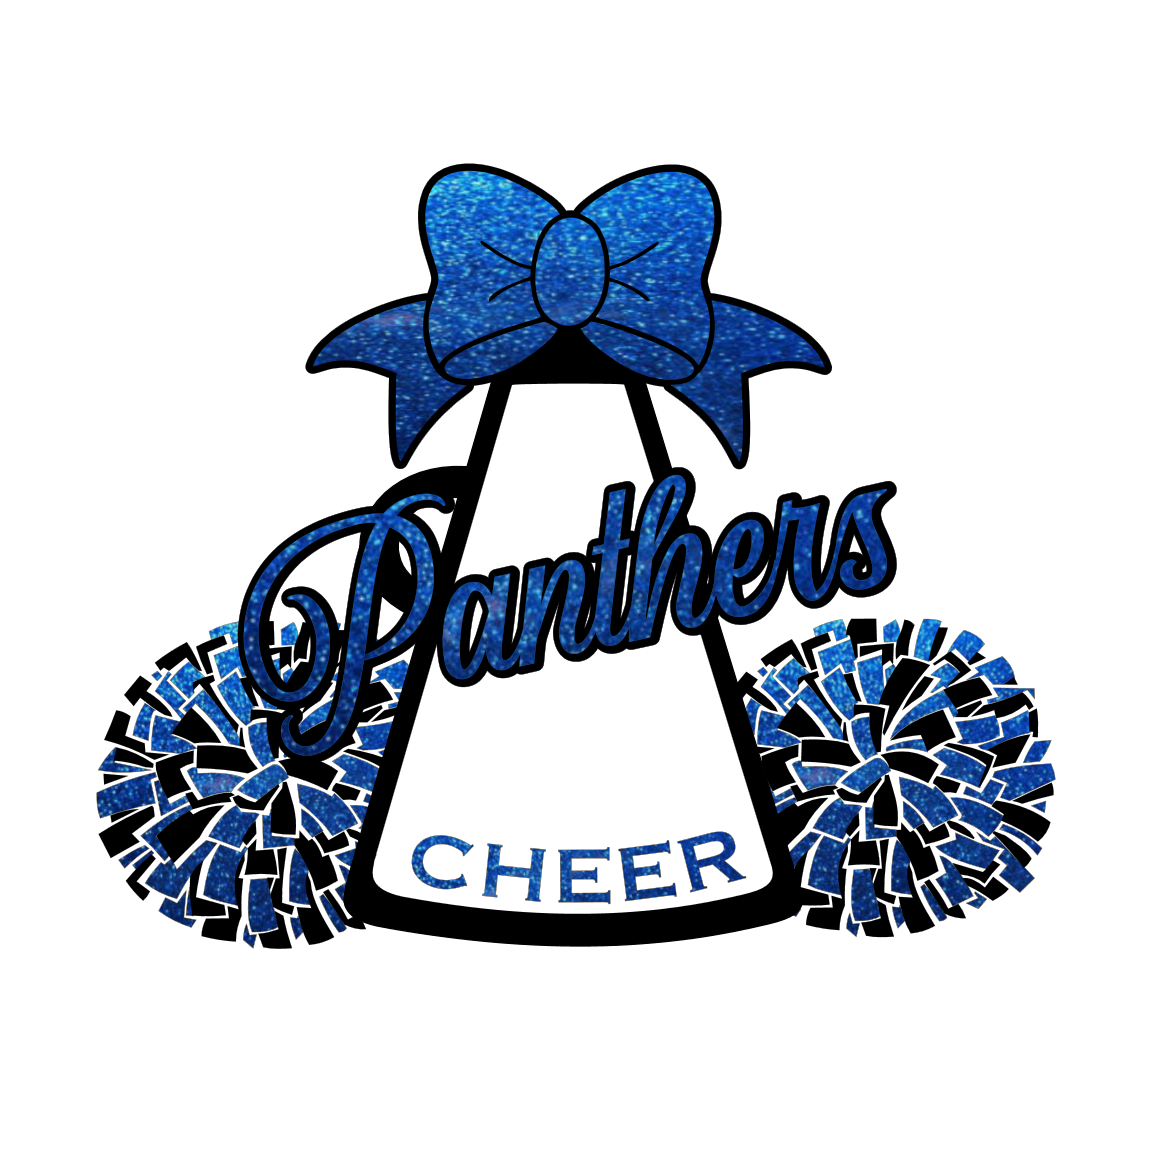 Registration check list . Panther clipart panther cheer